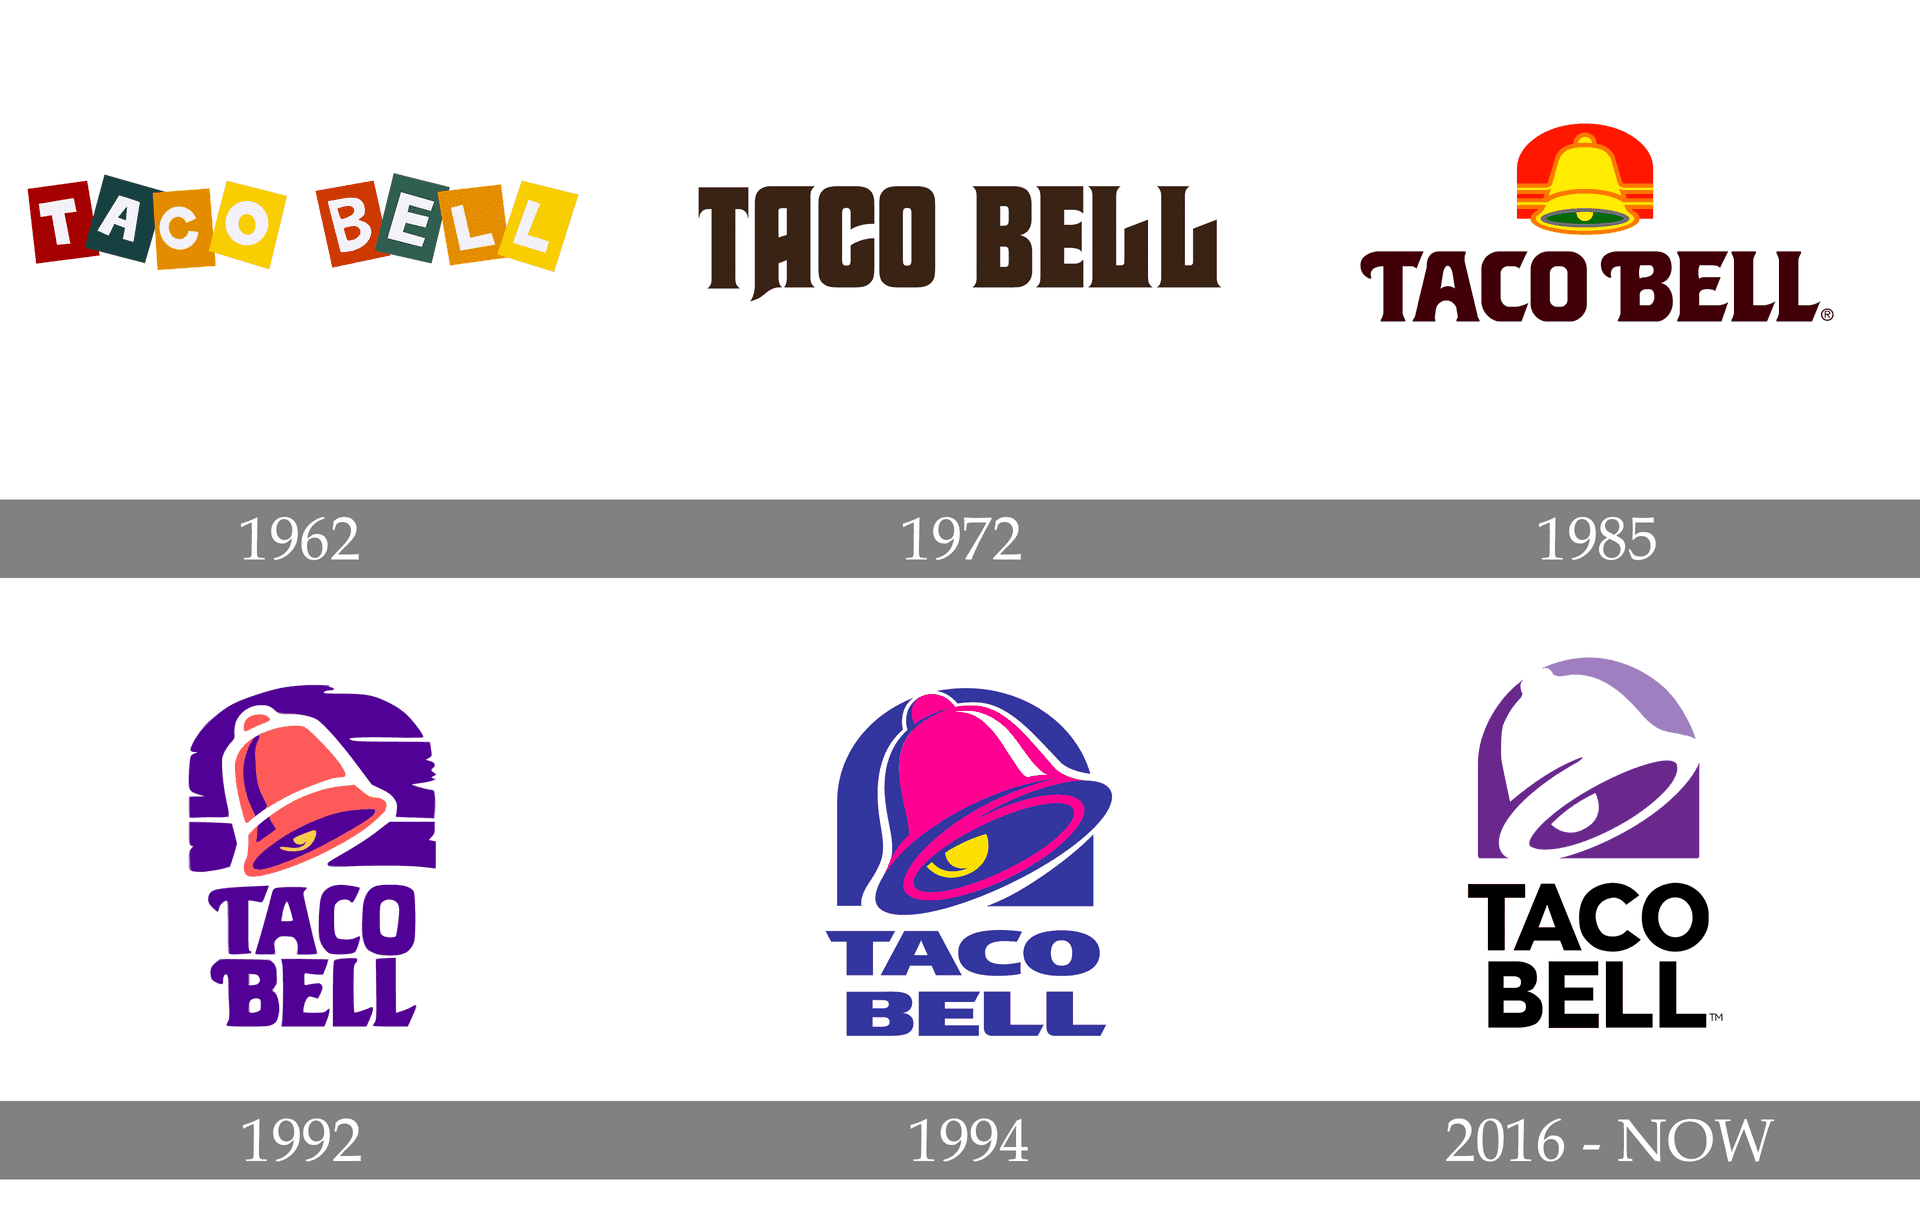 Fresh tacos from Taco Bell!